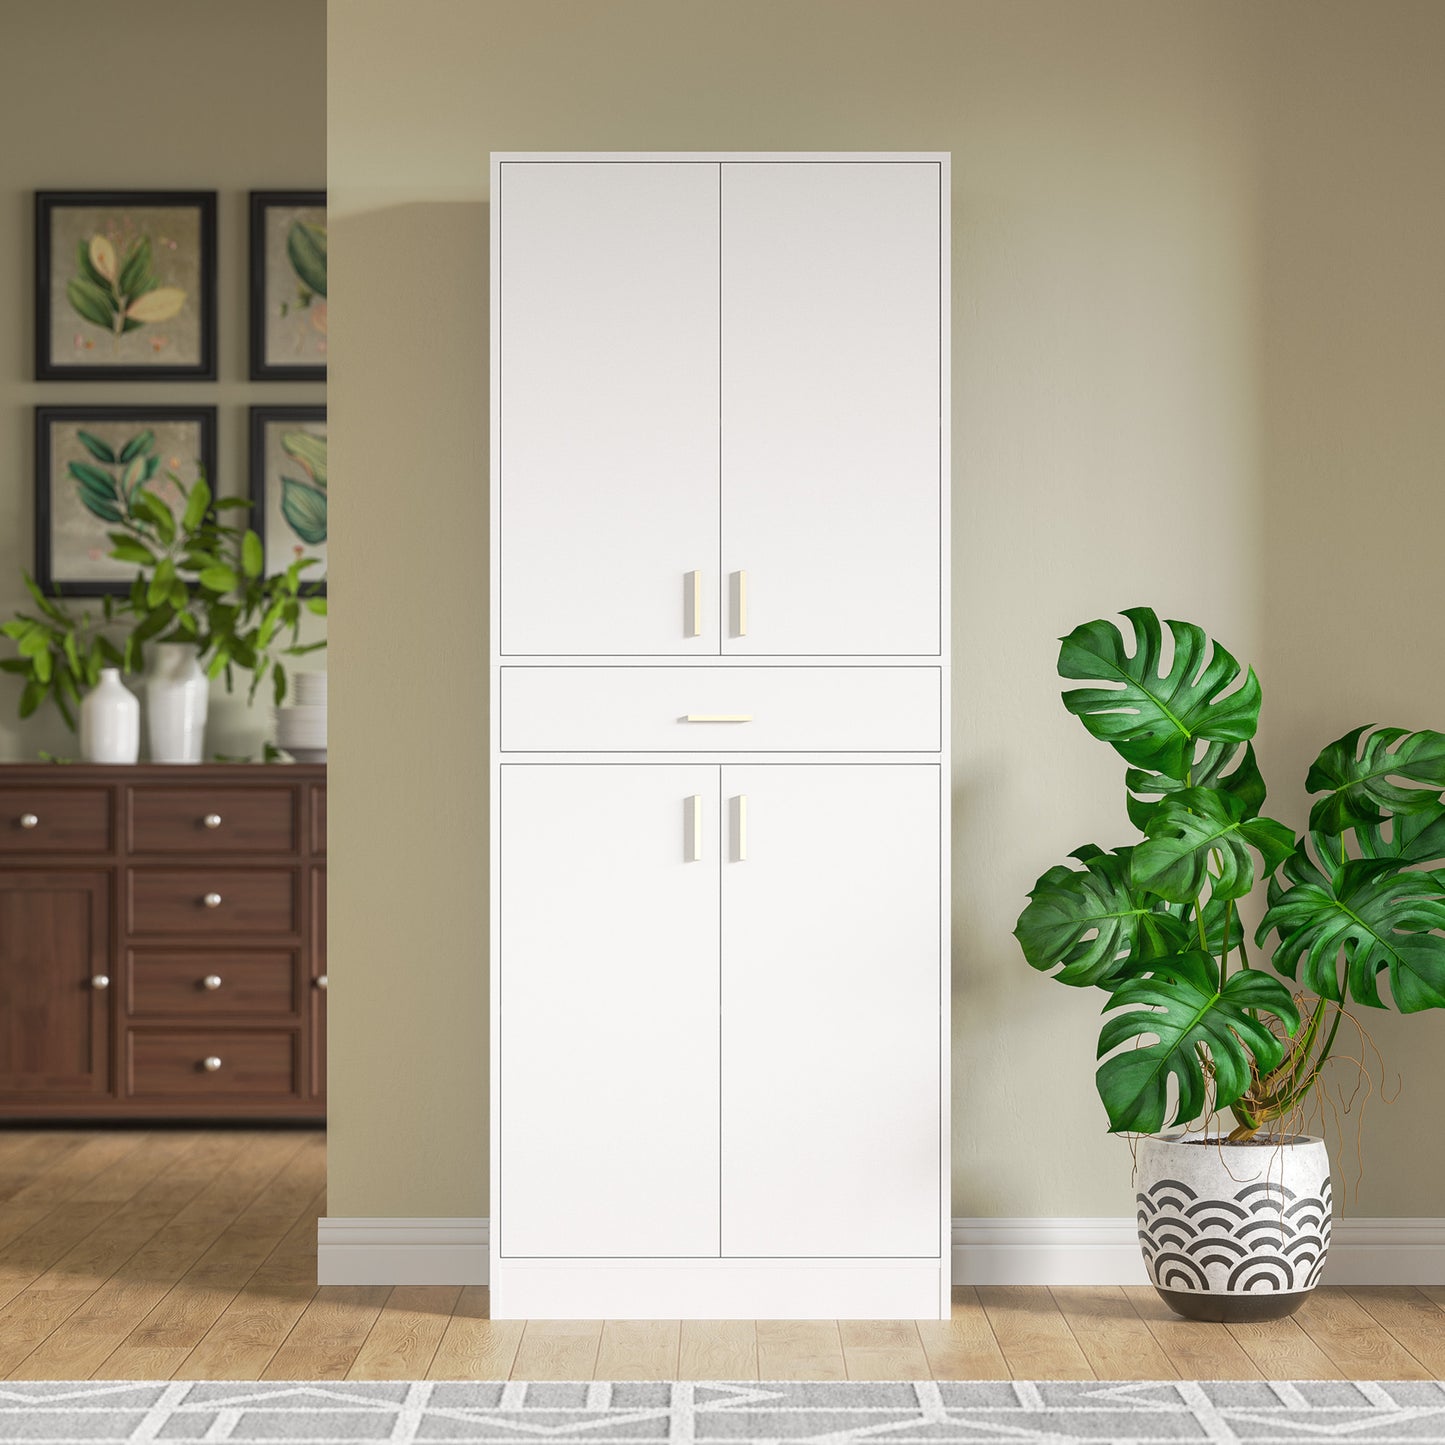 Cozy Castle Kitchen Pantry, 70" Freestanding Storage Cabinet with Doors and Adjustable Shelves, Pantry Cabinet for Kitchen, Bathroom or Hallway, White